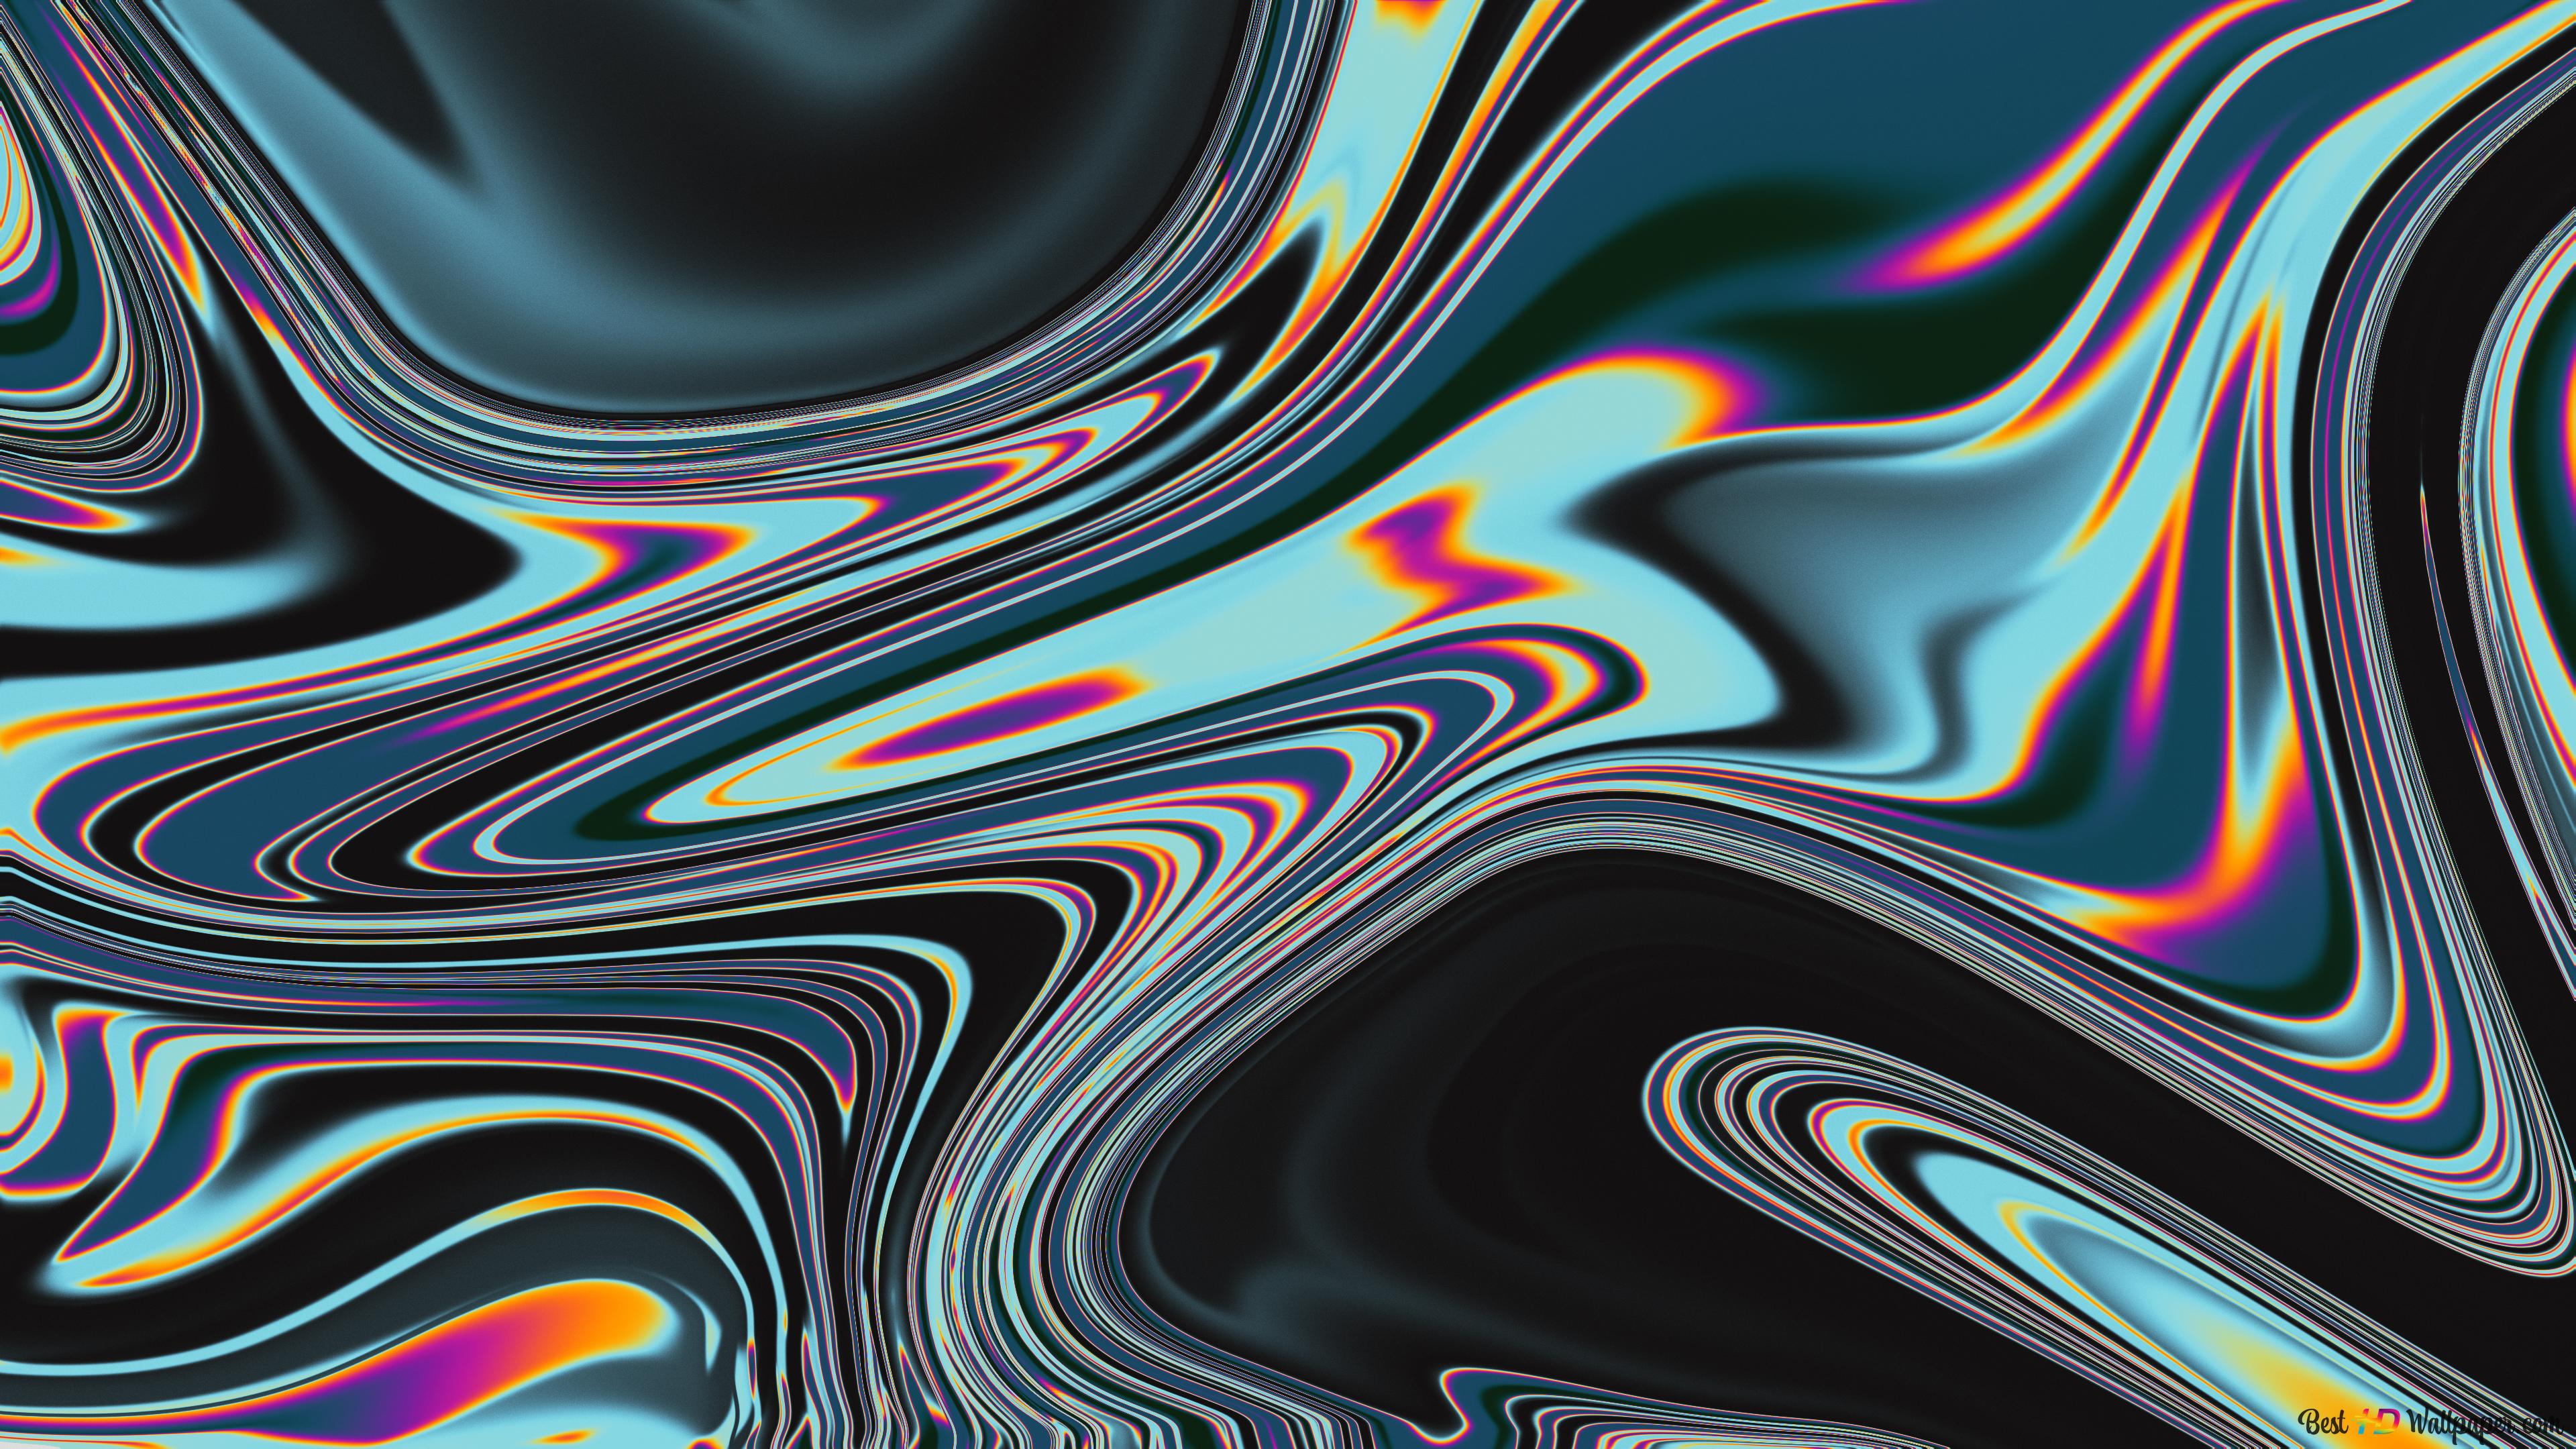 A colorful abstract wallpaper with wavy patterns - 3840x2160, trippy